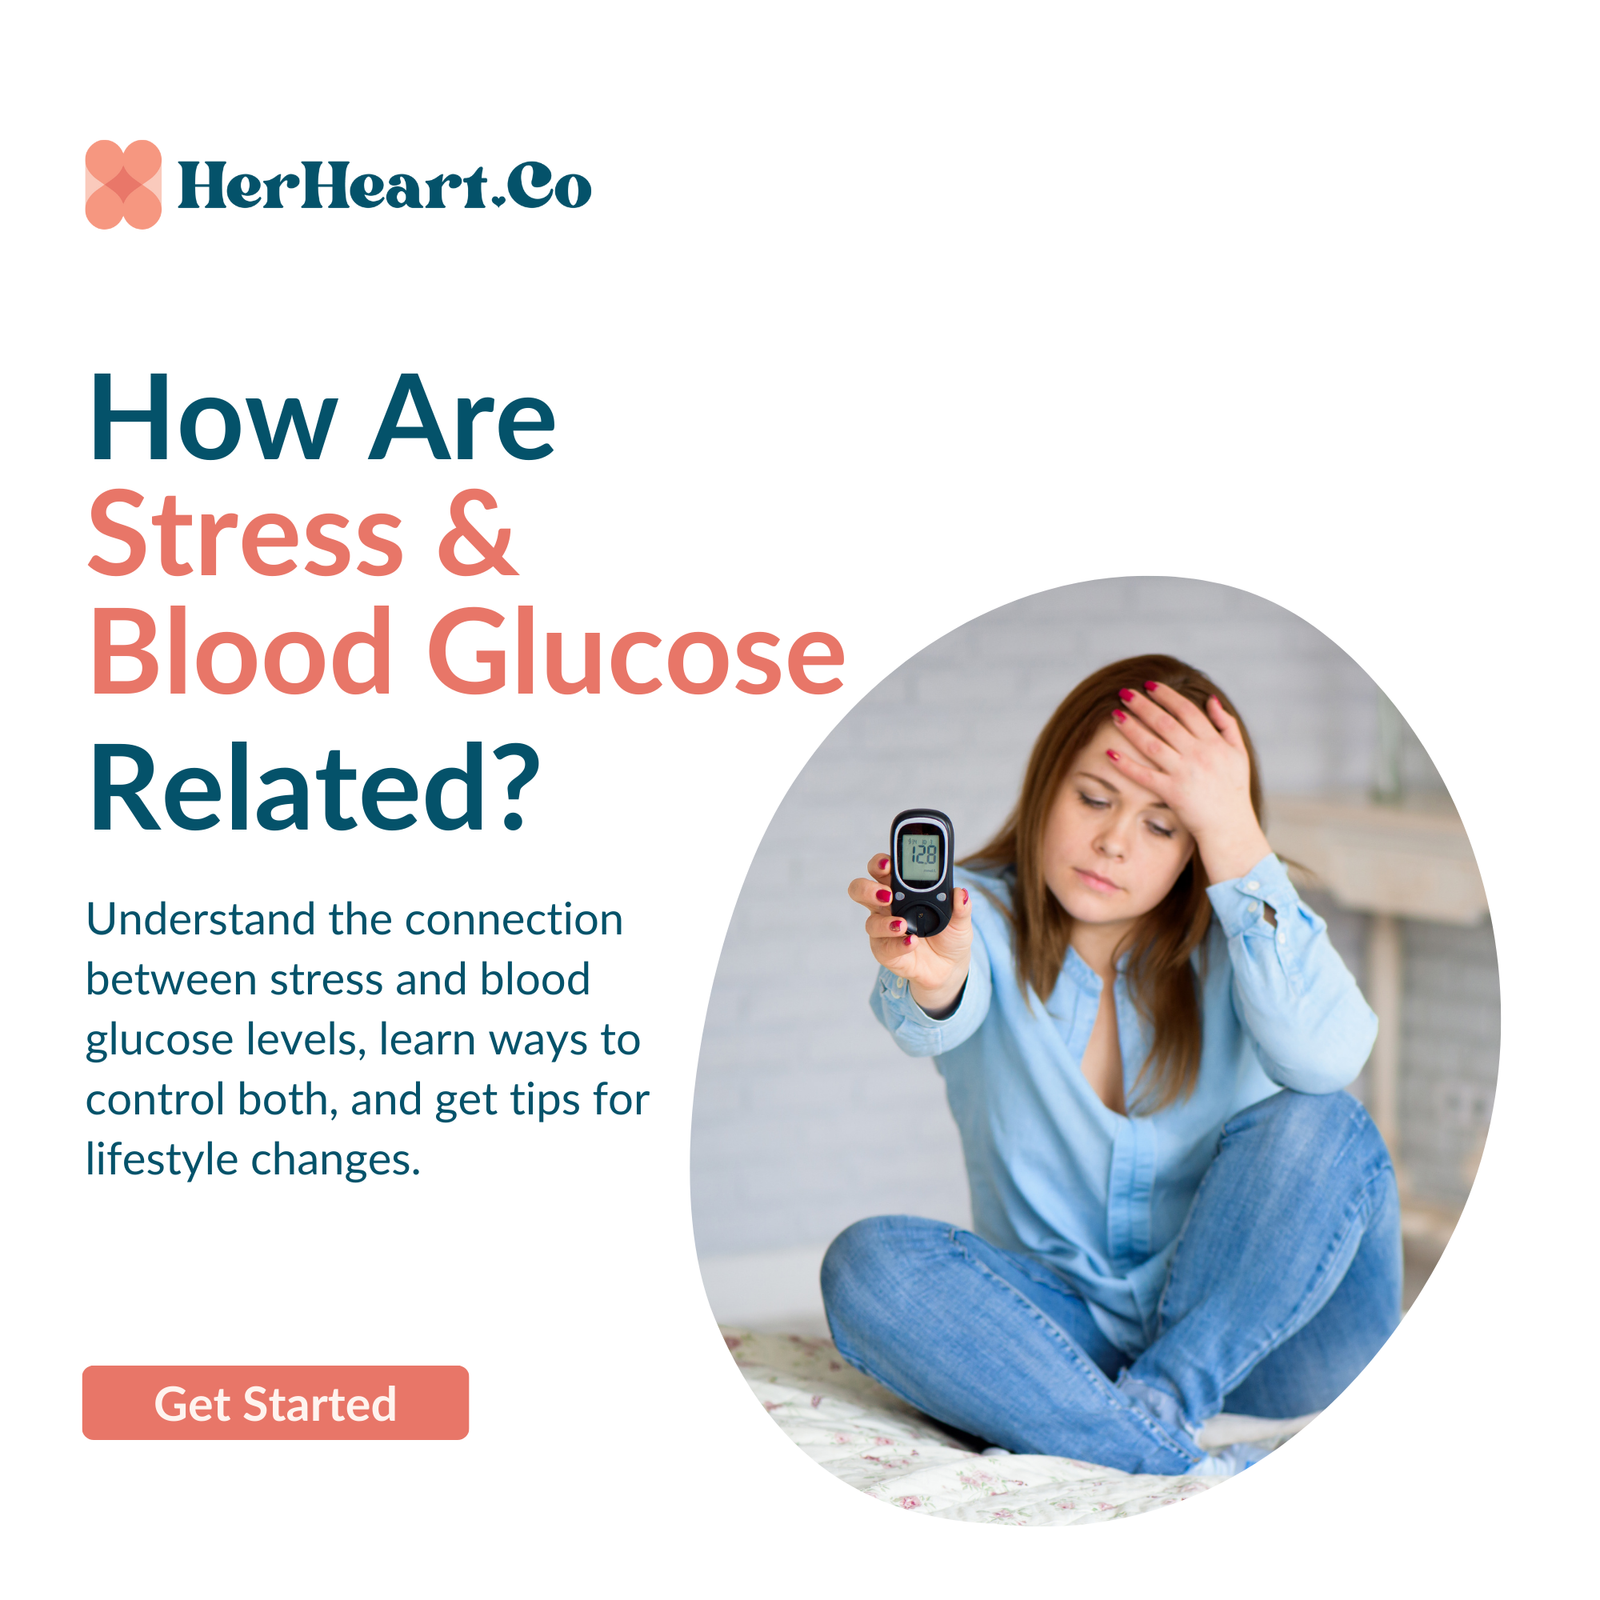 How Are Stress and Blood Glucose Related?